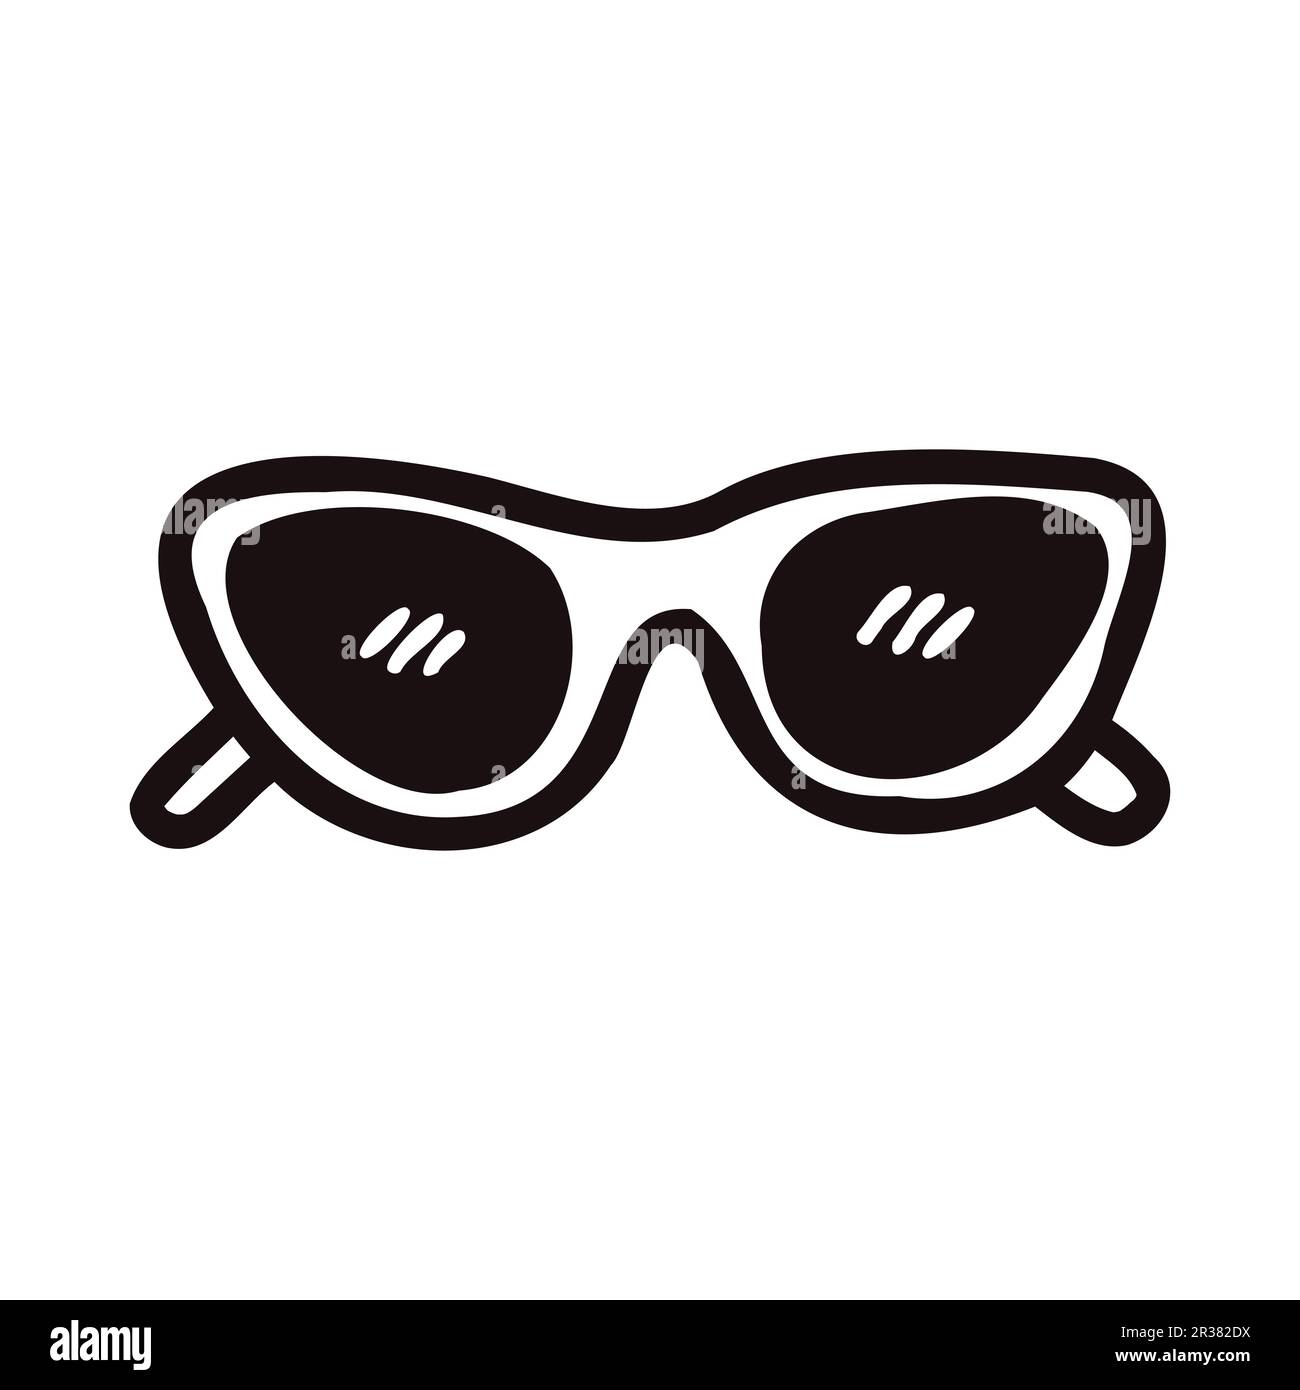 https://c8.alamy.com/comp/2R382DX/hand-drawn-sunglasses-in-doodle-style-isolated-on-background-2R382DX.jpg